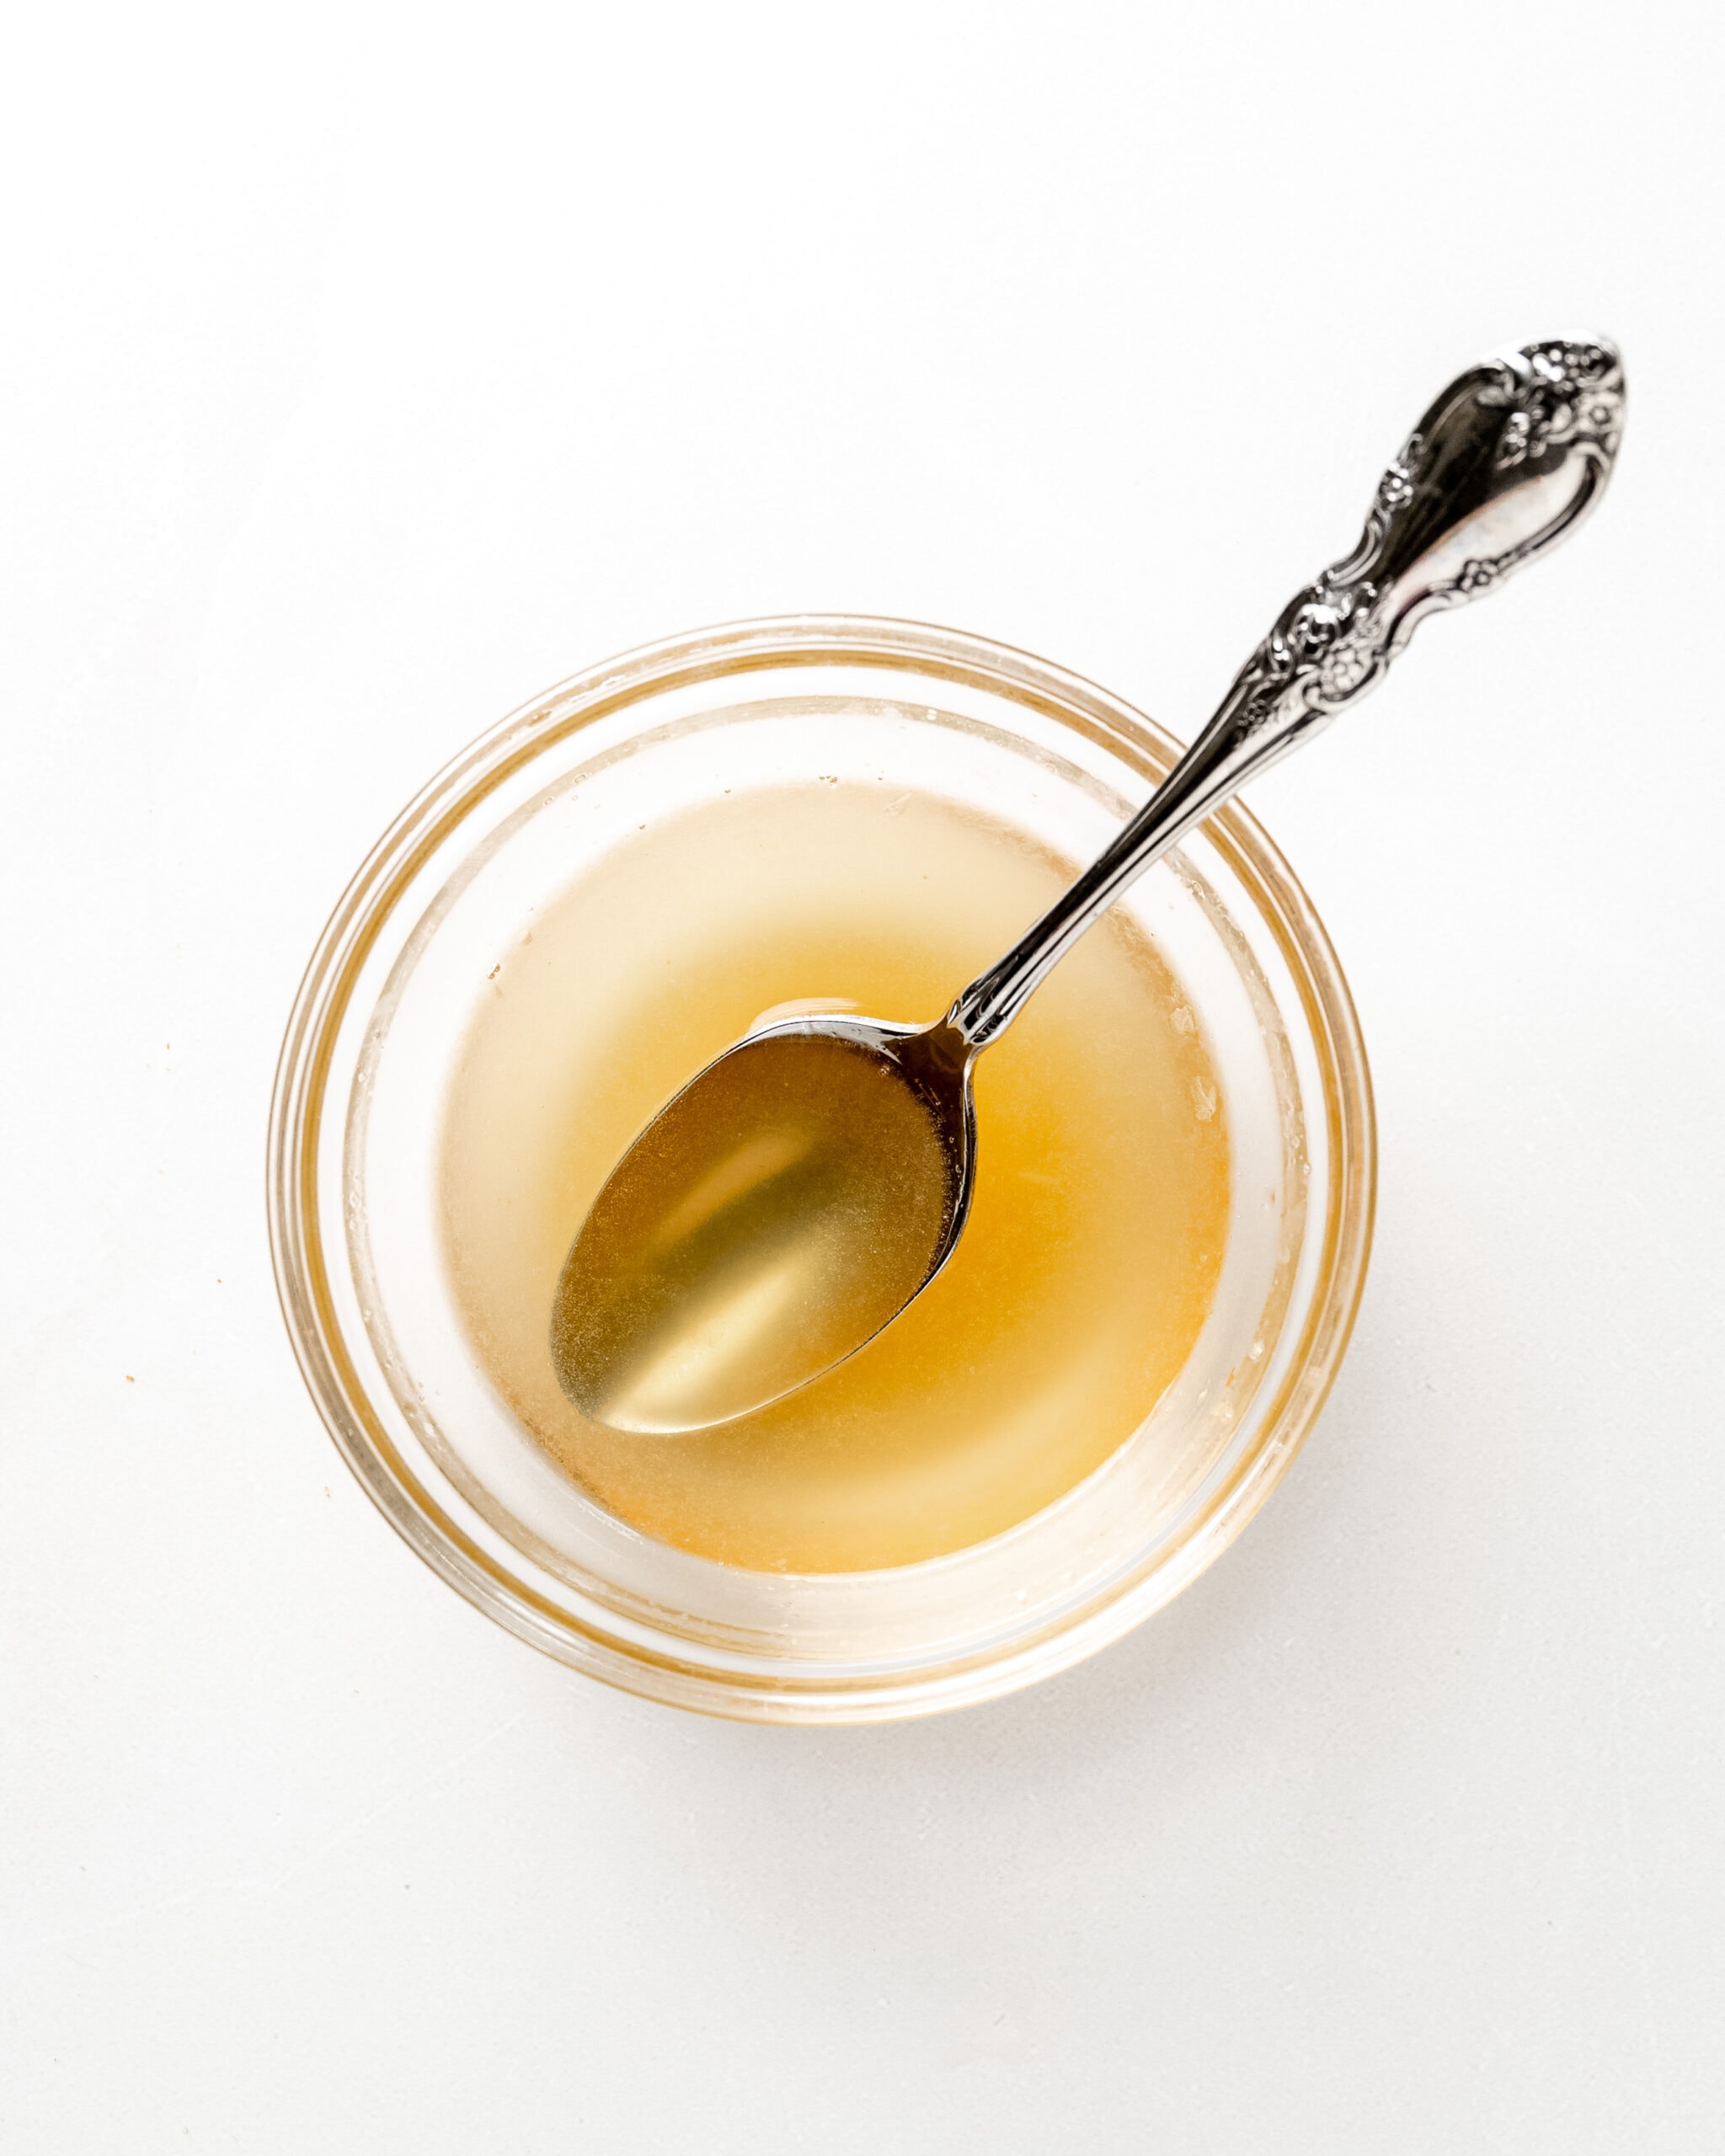 A clear glass bowl with a honey lemon syrup and a silver spoon in the middle.